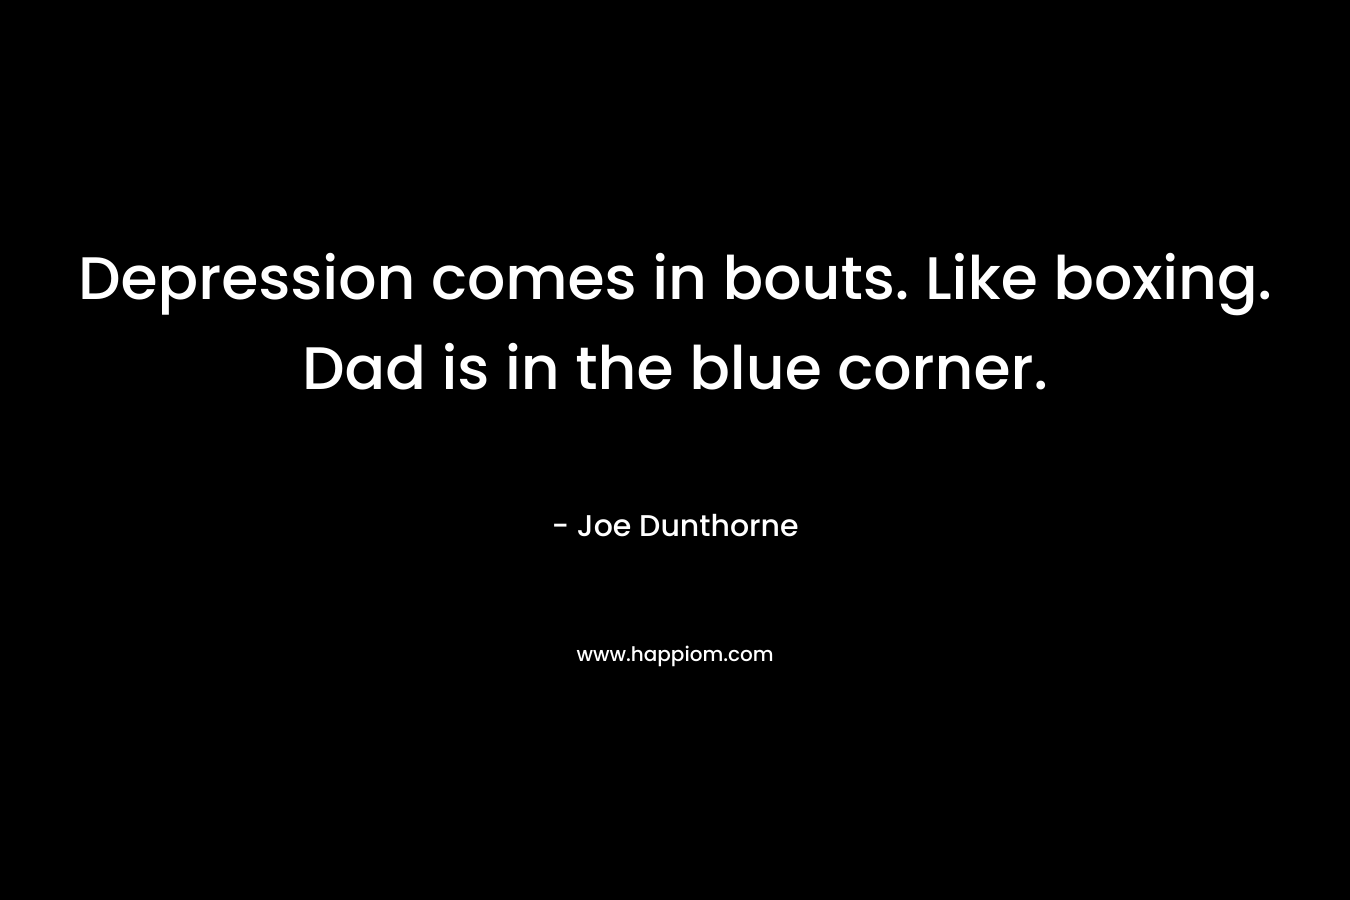 Depression comes in bouts. Like boxing. Dad is in the blue corner. – Joe Dunthorne